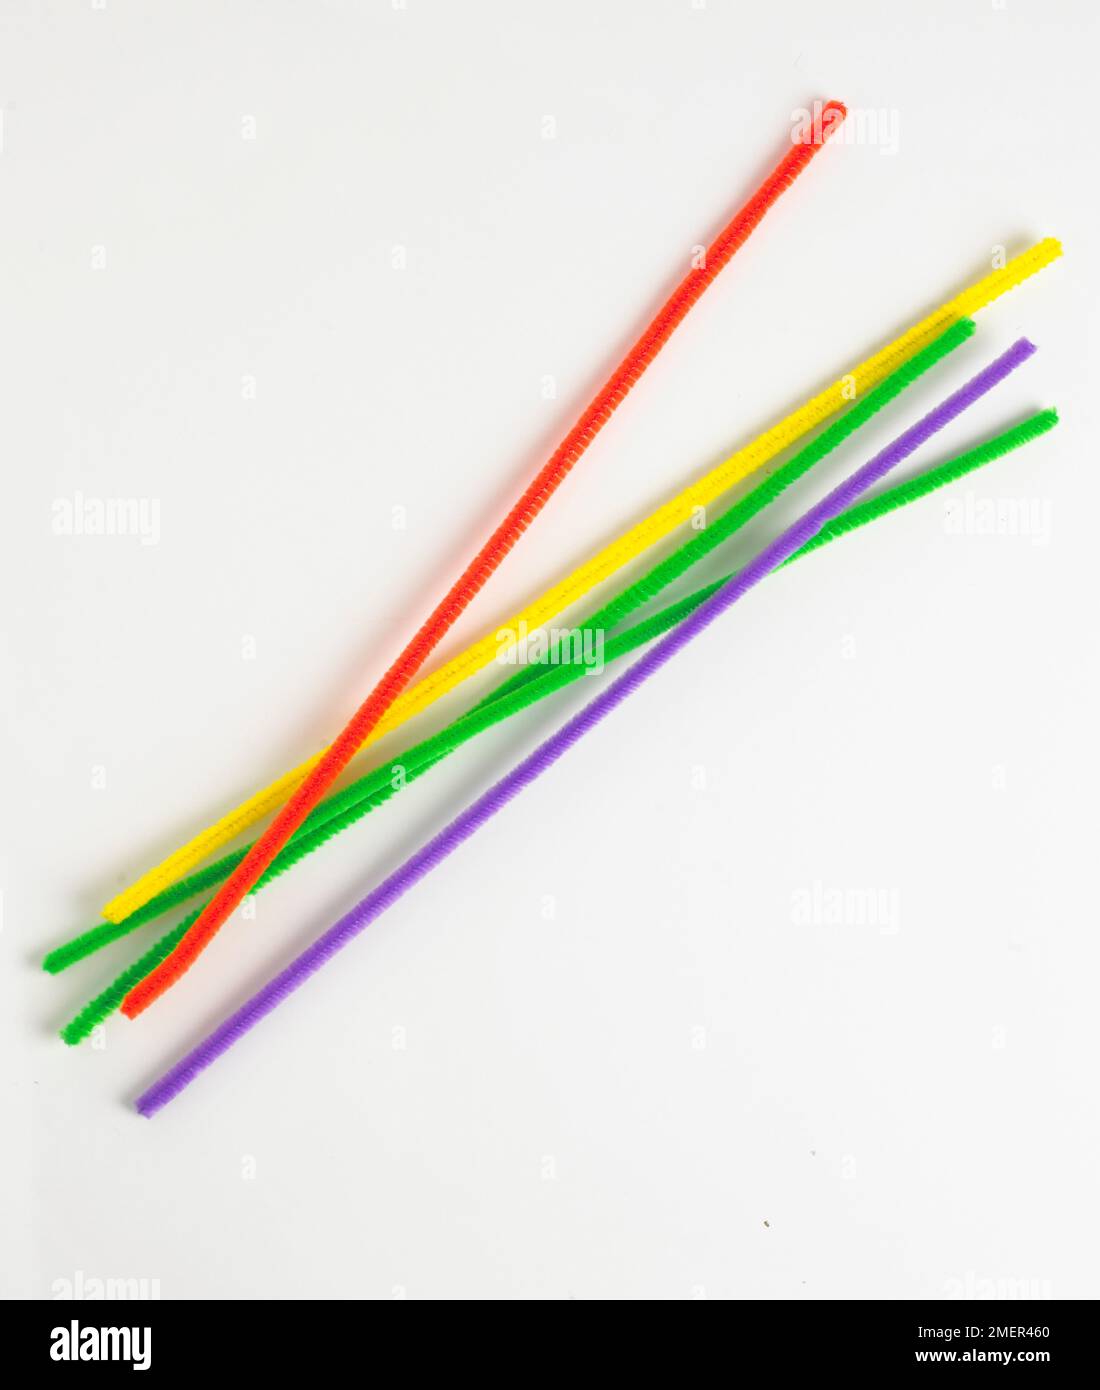 3,946 Pipe Cleaners White Background Images, Stock Photos, 3D